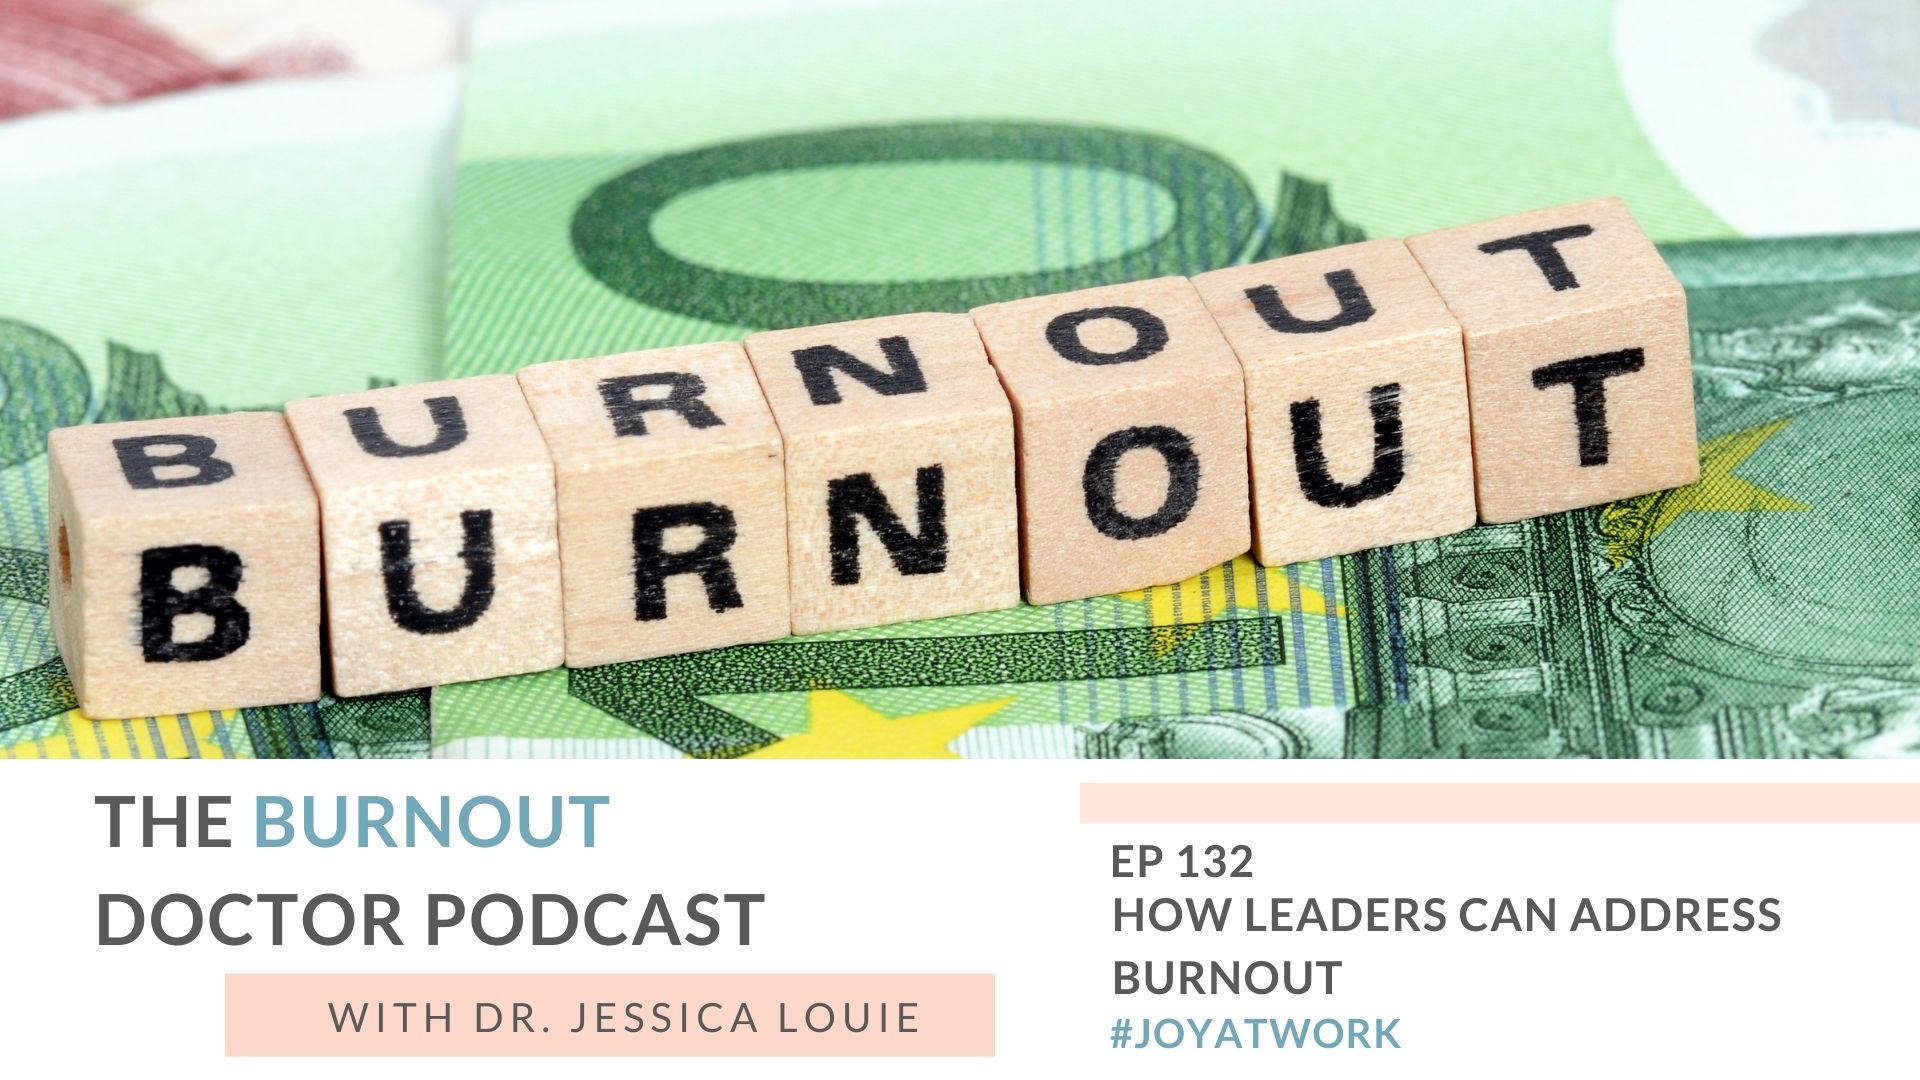 How leaders can address burnout in their teams. How can I help with leadership burnout? What is burnout in pharmacy and healthcare? The Burnout Doctor Podcast with Dr. Jessica Louie. Keynote speaker on burnout and clutter.